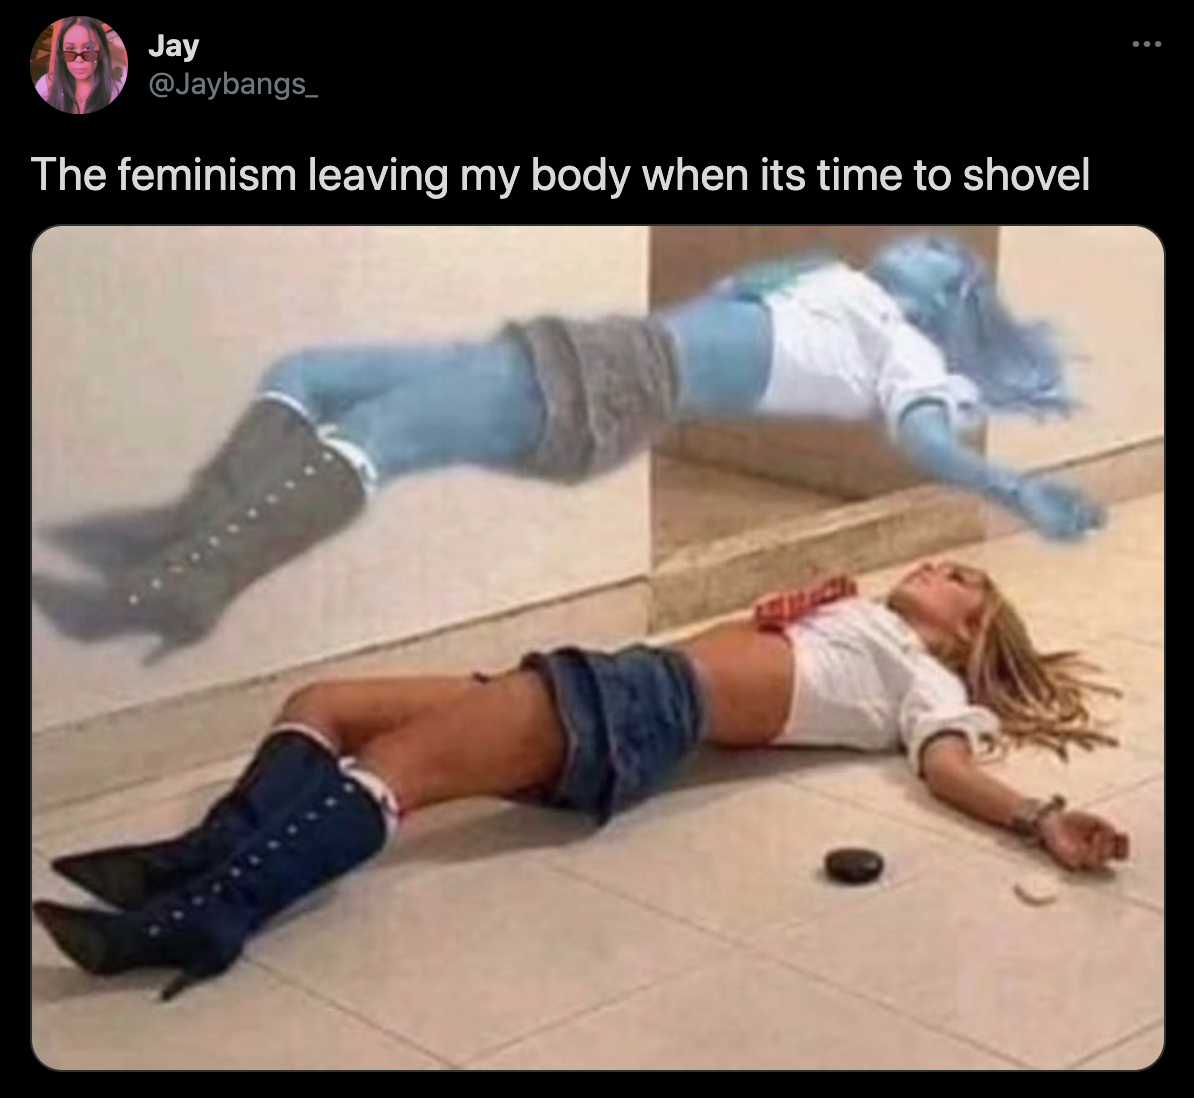 funny twitter jokes - The feminism leaving my body when its time to shovel